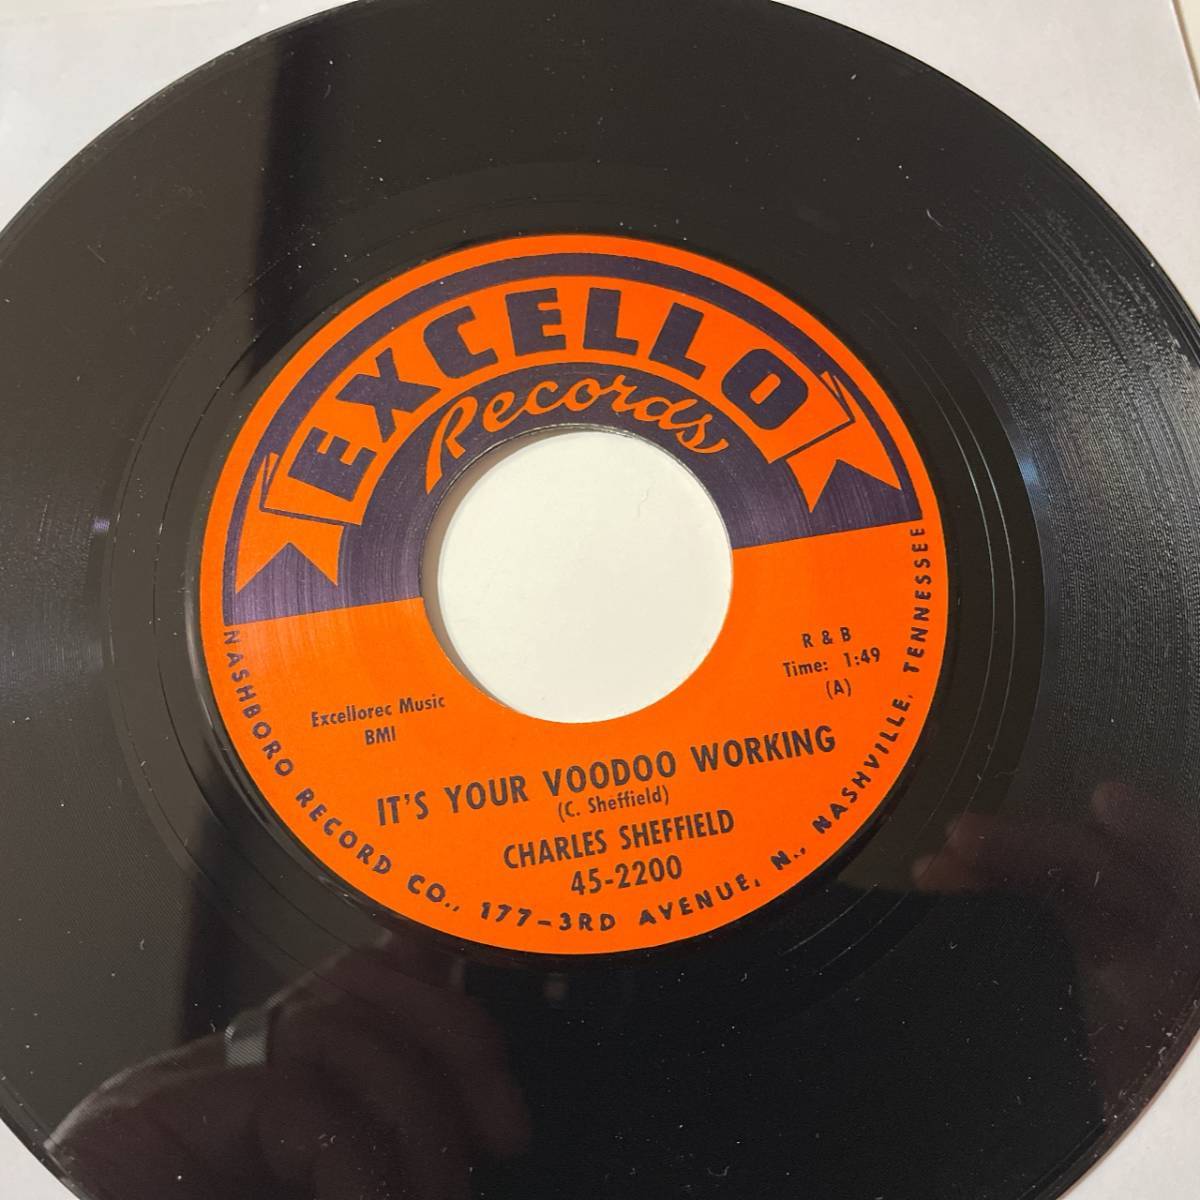 Charles Sheffield - It's Your Voodoo Working / Rock 'N Roll Train☆UK Re 7″☆Popcorn R&B☆激レア盤Repro_画像1